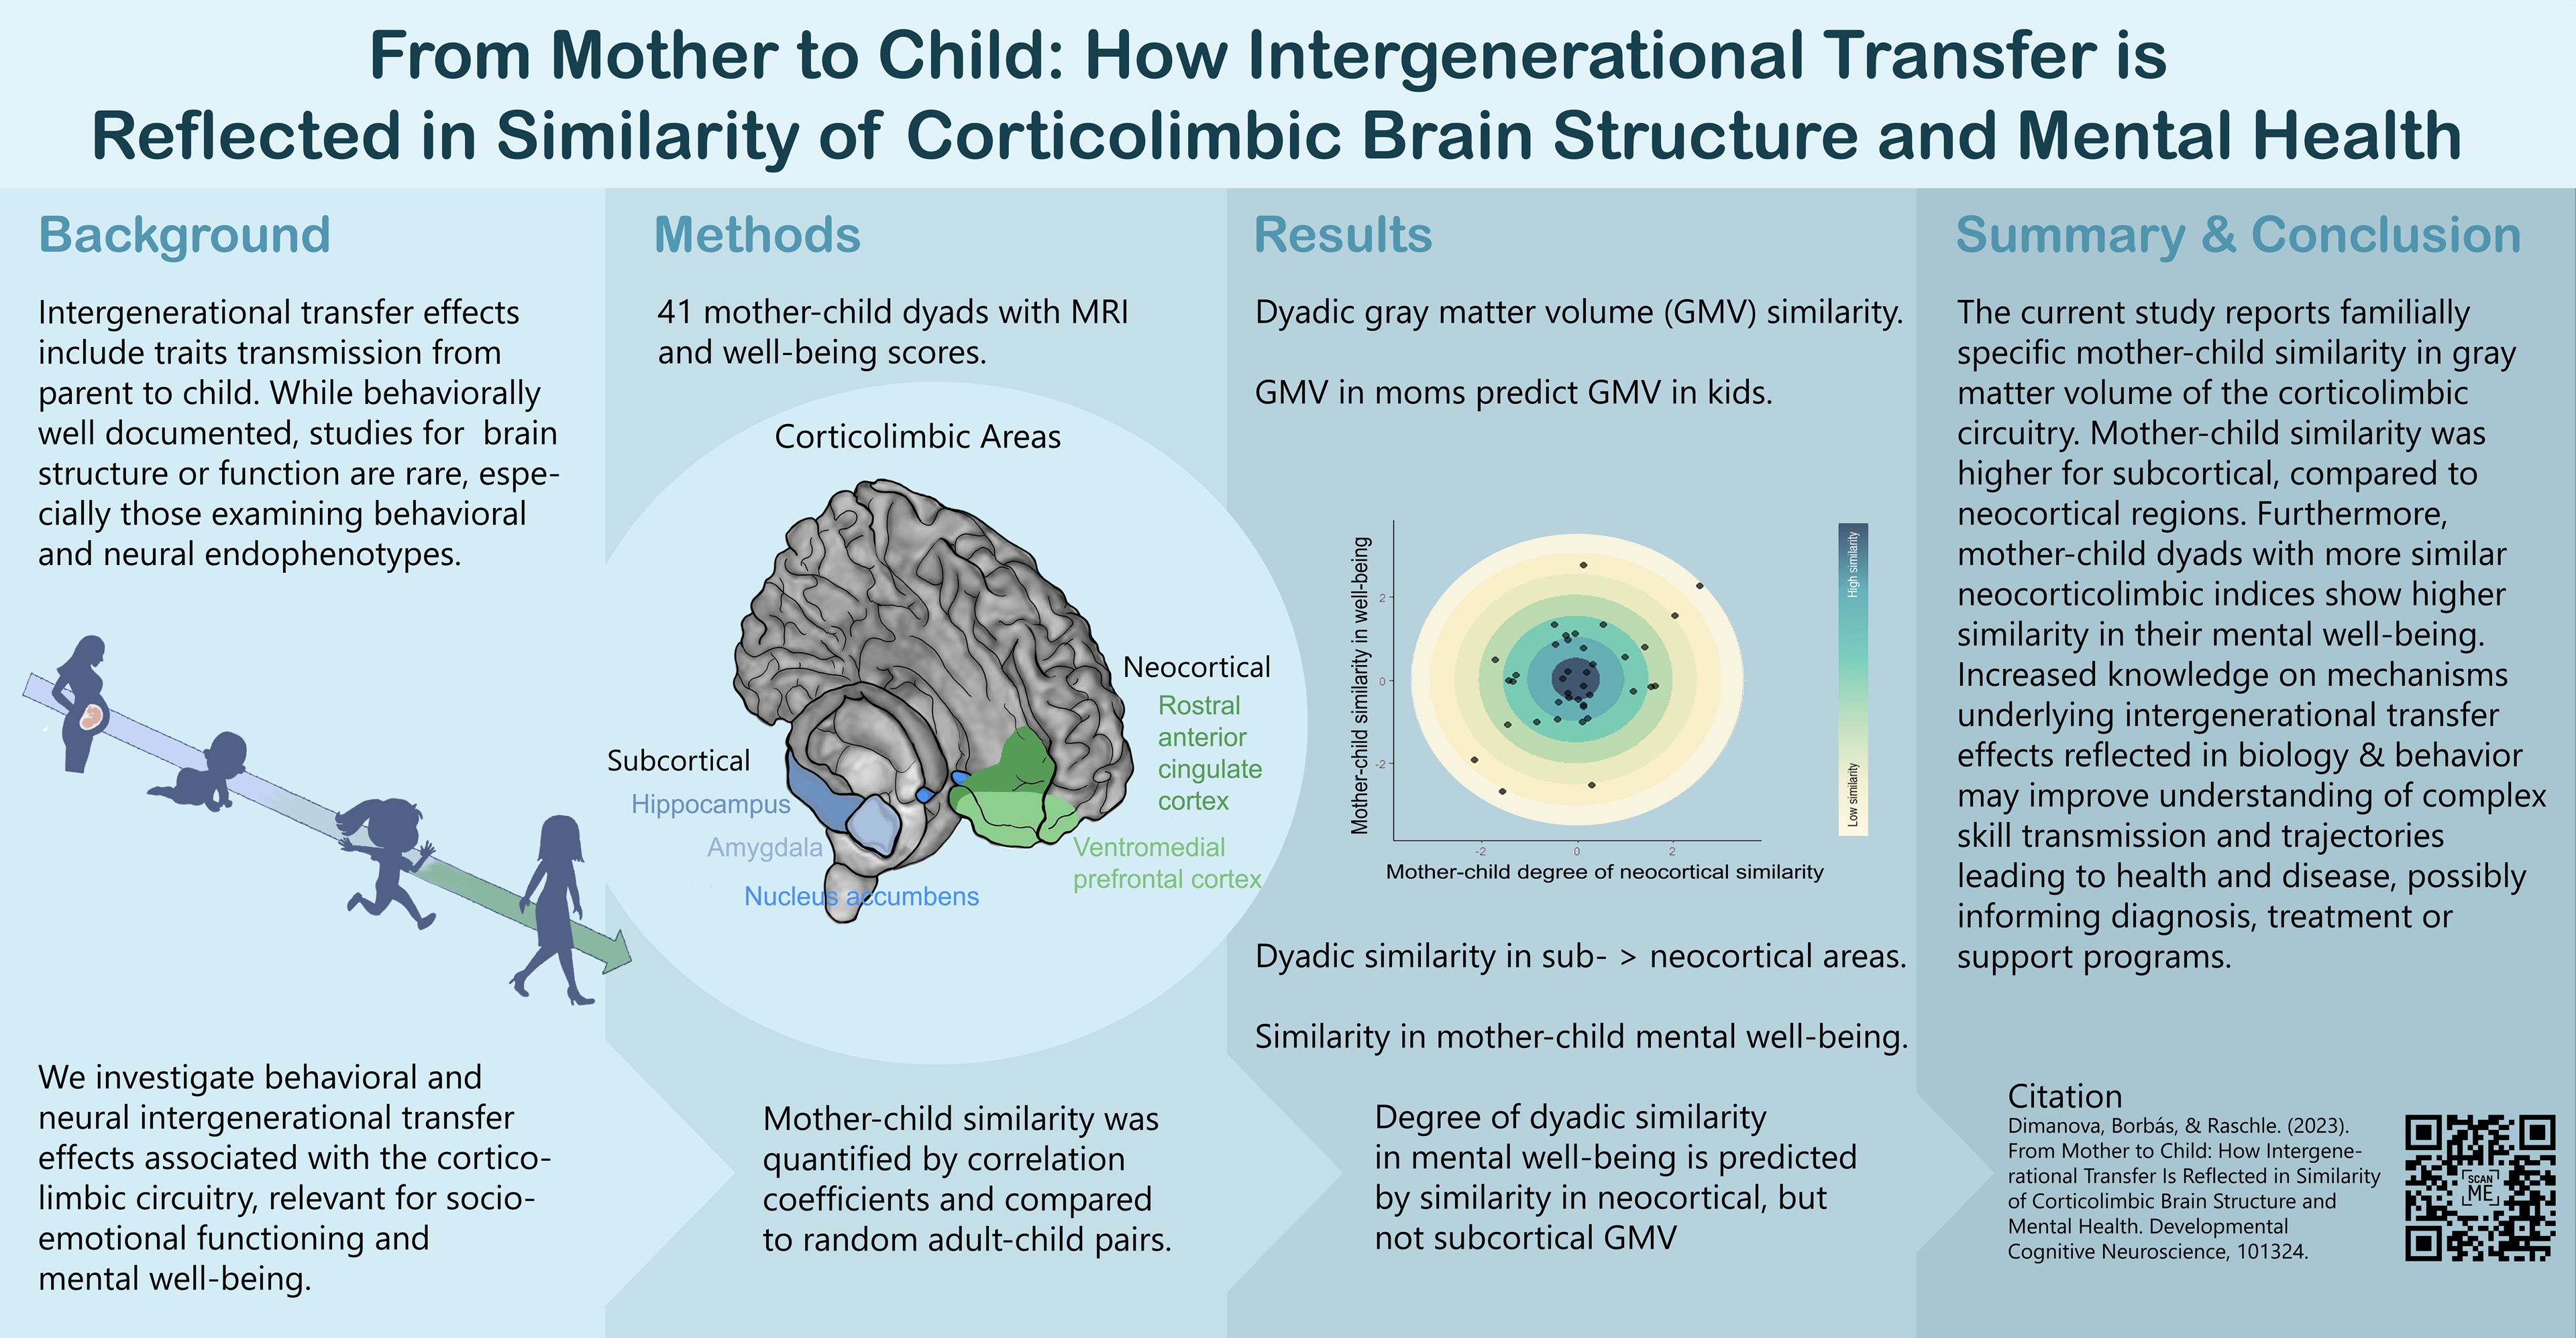 From mother to child: How intergenerational transfer is reflected in similarity of corticolimbic brain structure and mental health